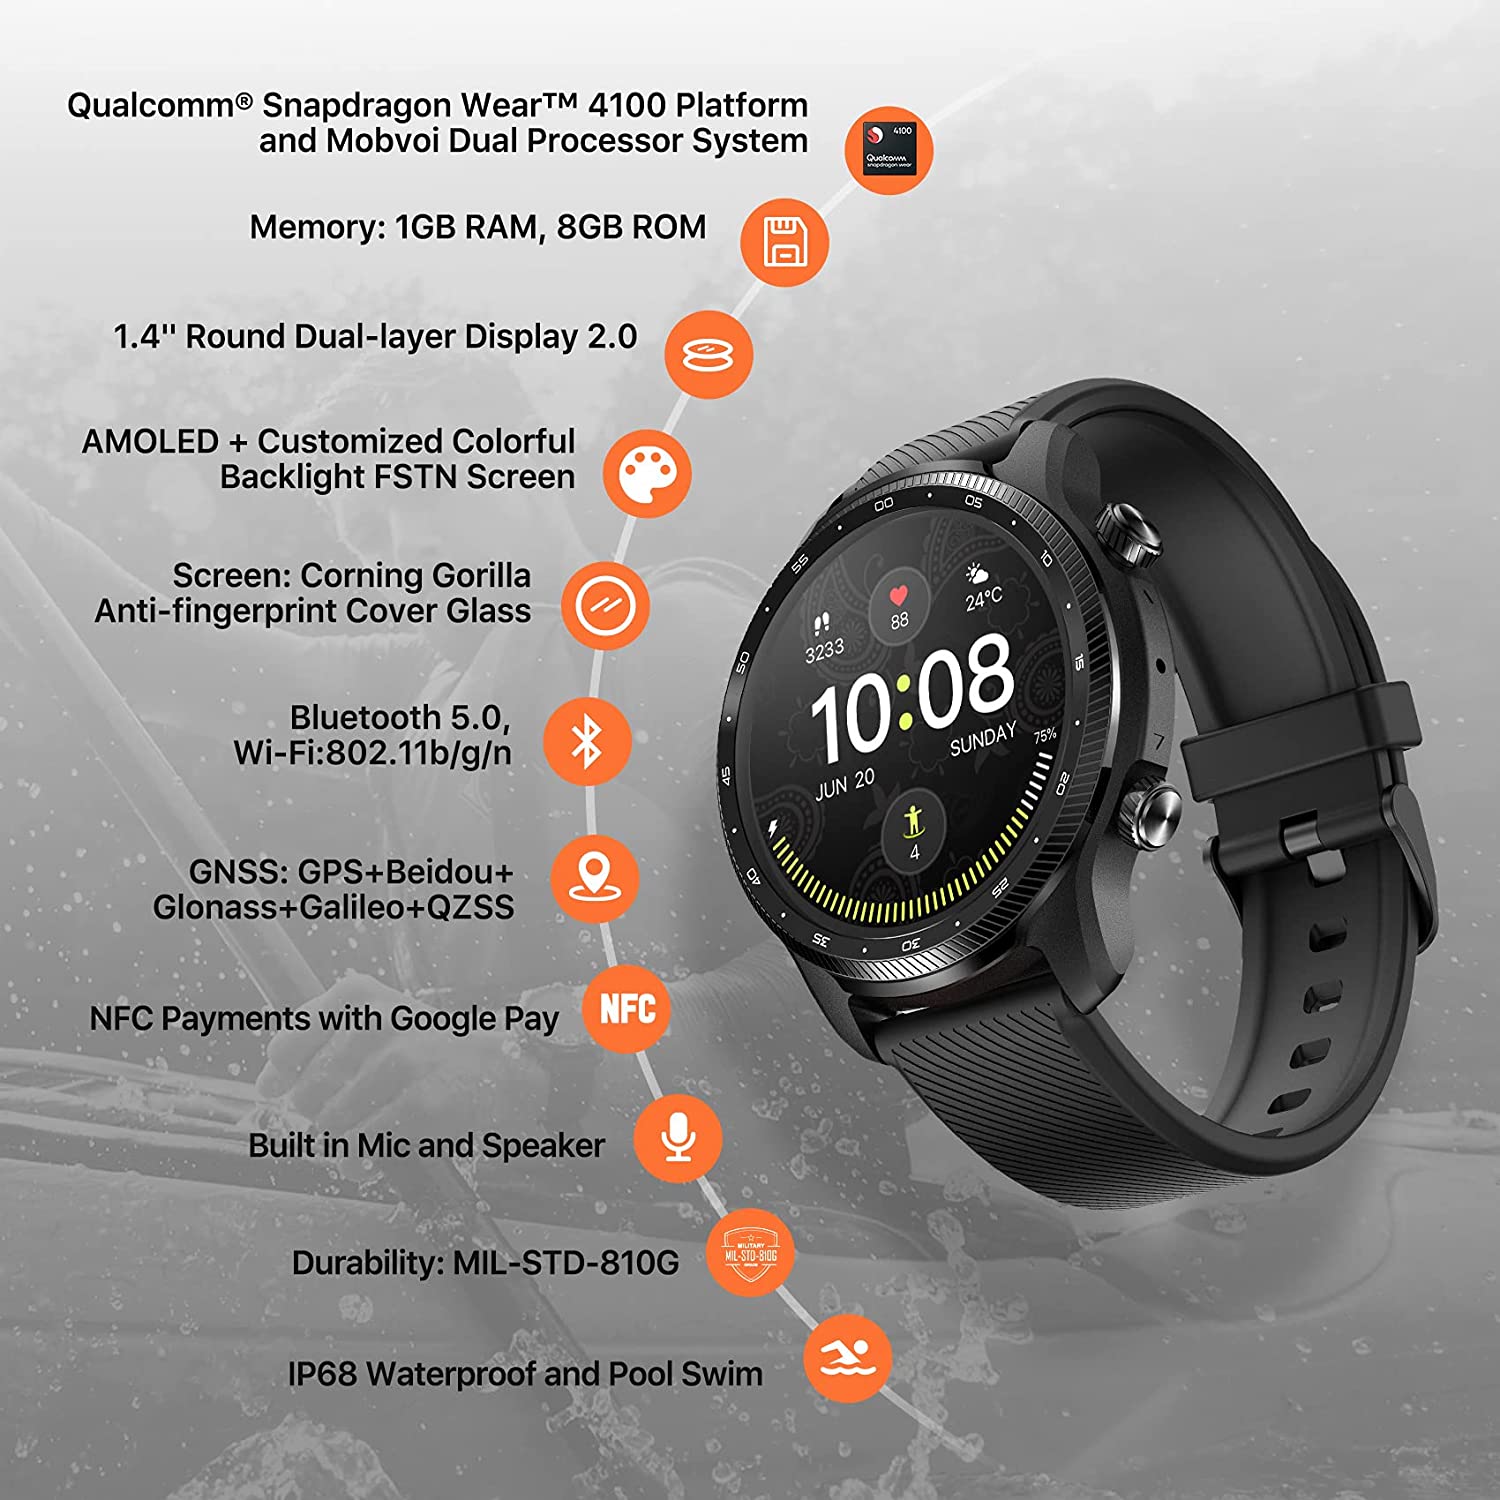 The Mobvoic Ticwatch Pro Smartwatch